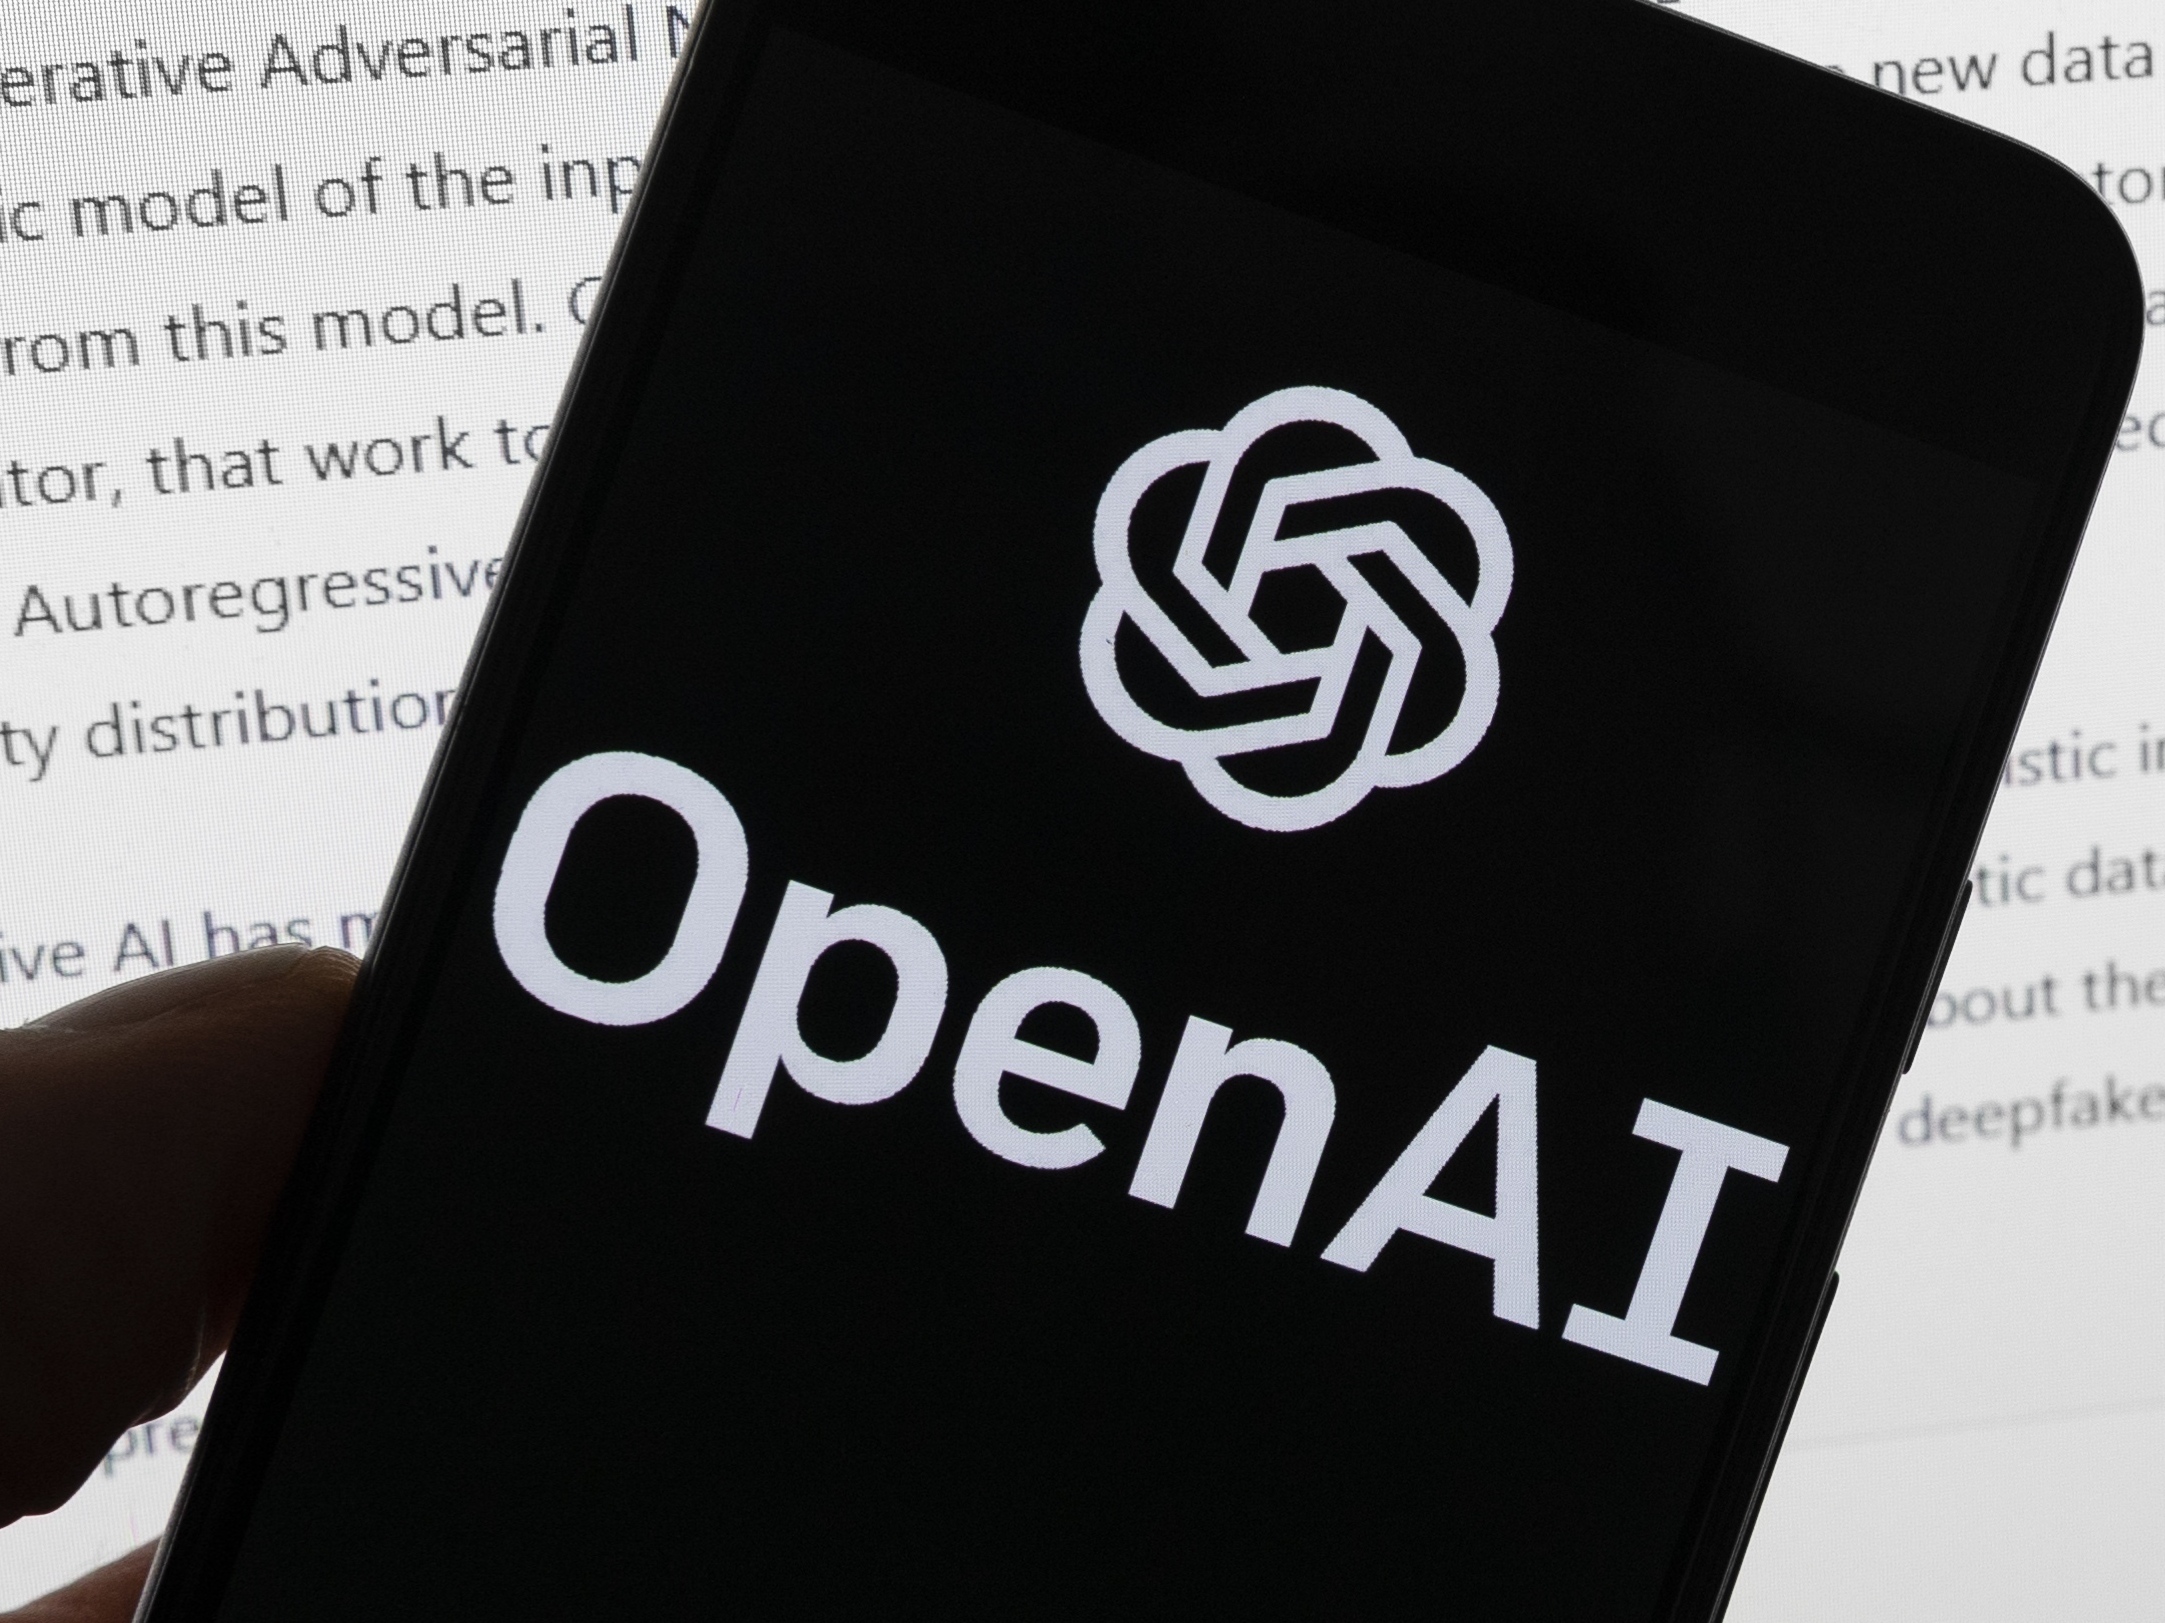 Eight newspapers sue OpenAI, Microsoft for copyright infringement